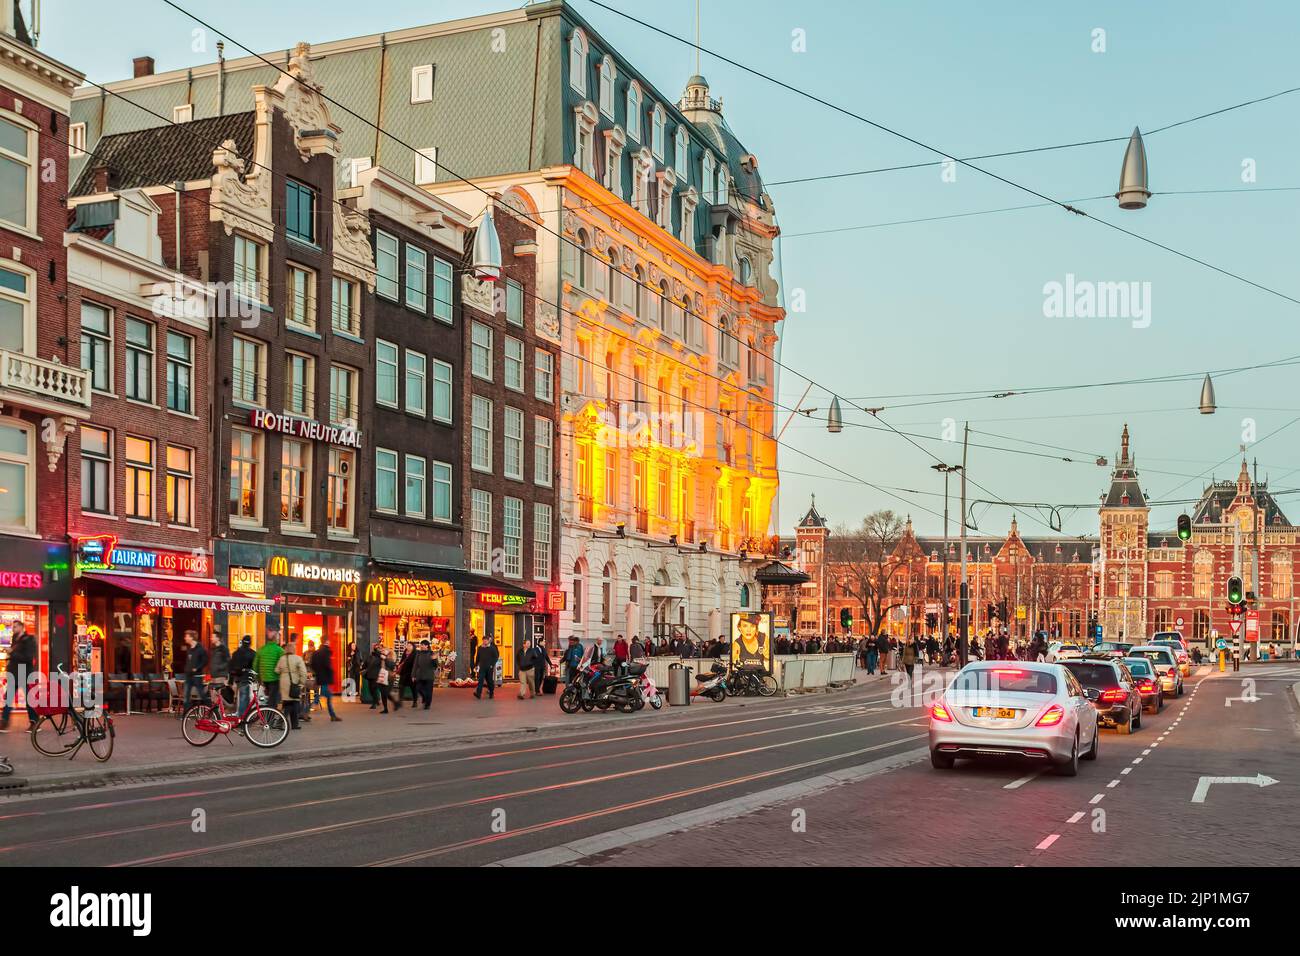 AMSTERDAM, THE NETHERLANDS - MARCH 12, 2015: Sunset view of the famous Damrak with shops, hotels and canal boats in Amsterdam, The Netherlands Stock Photo